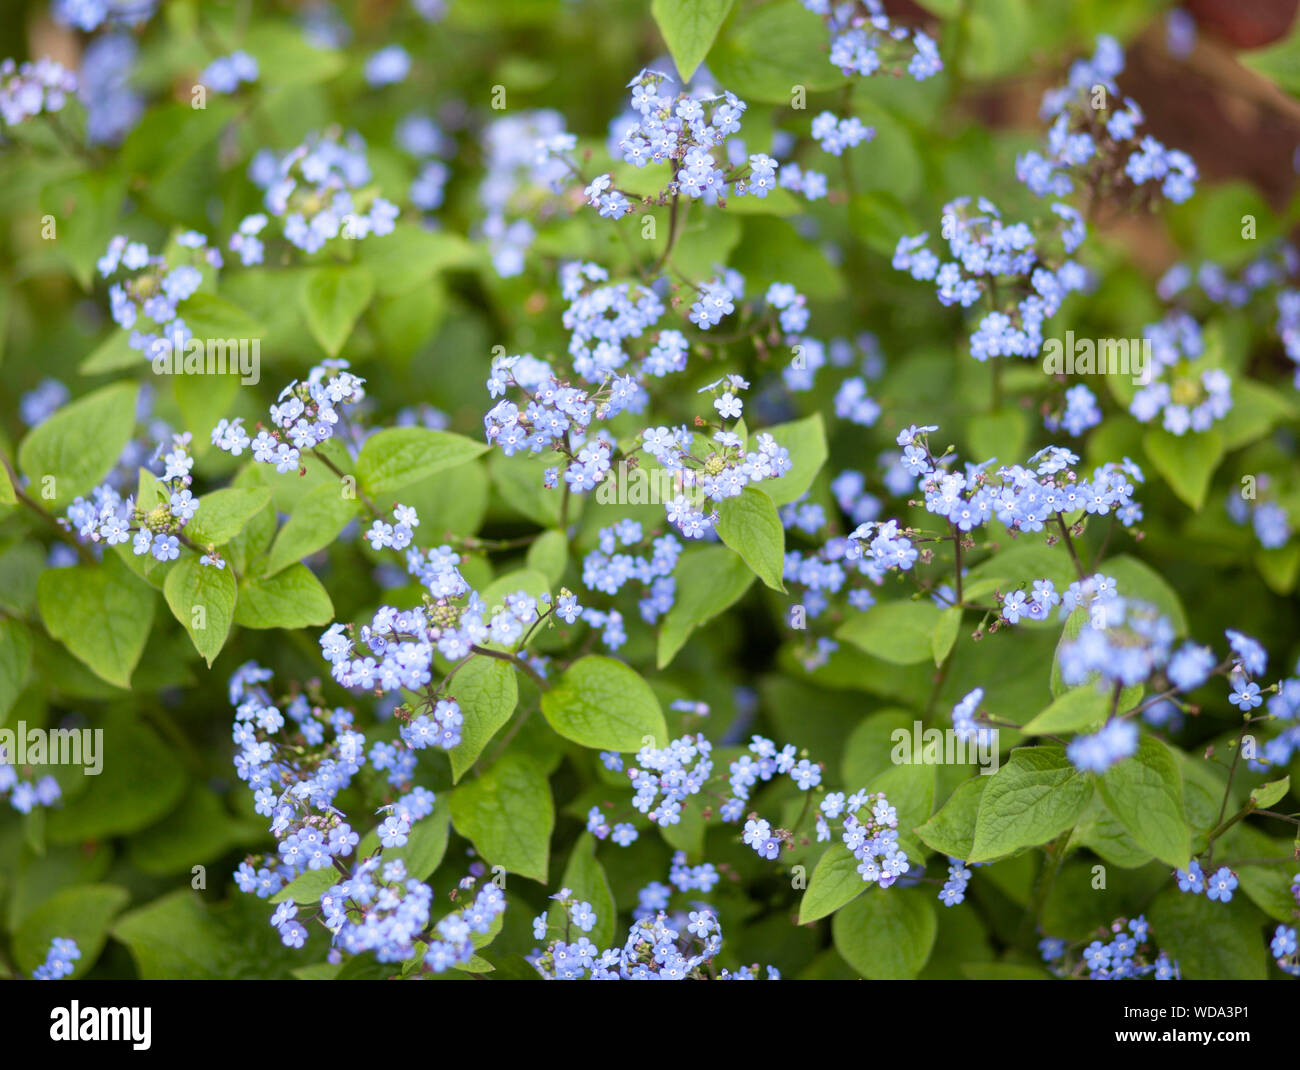 Forget me not flowers Stock Photo